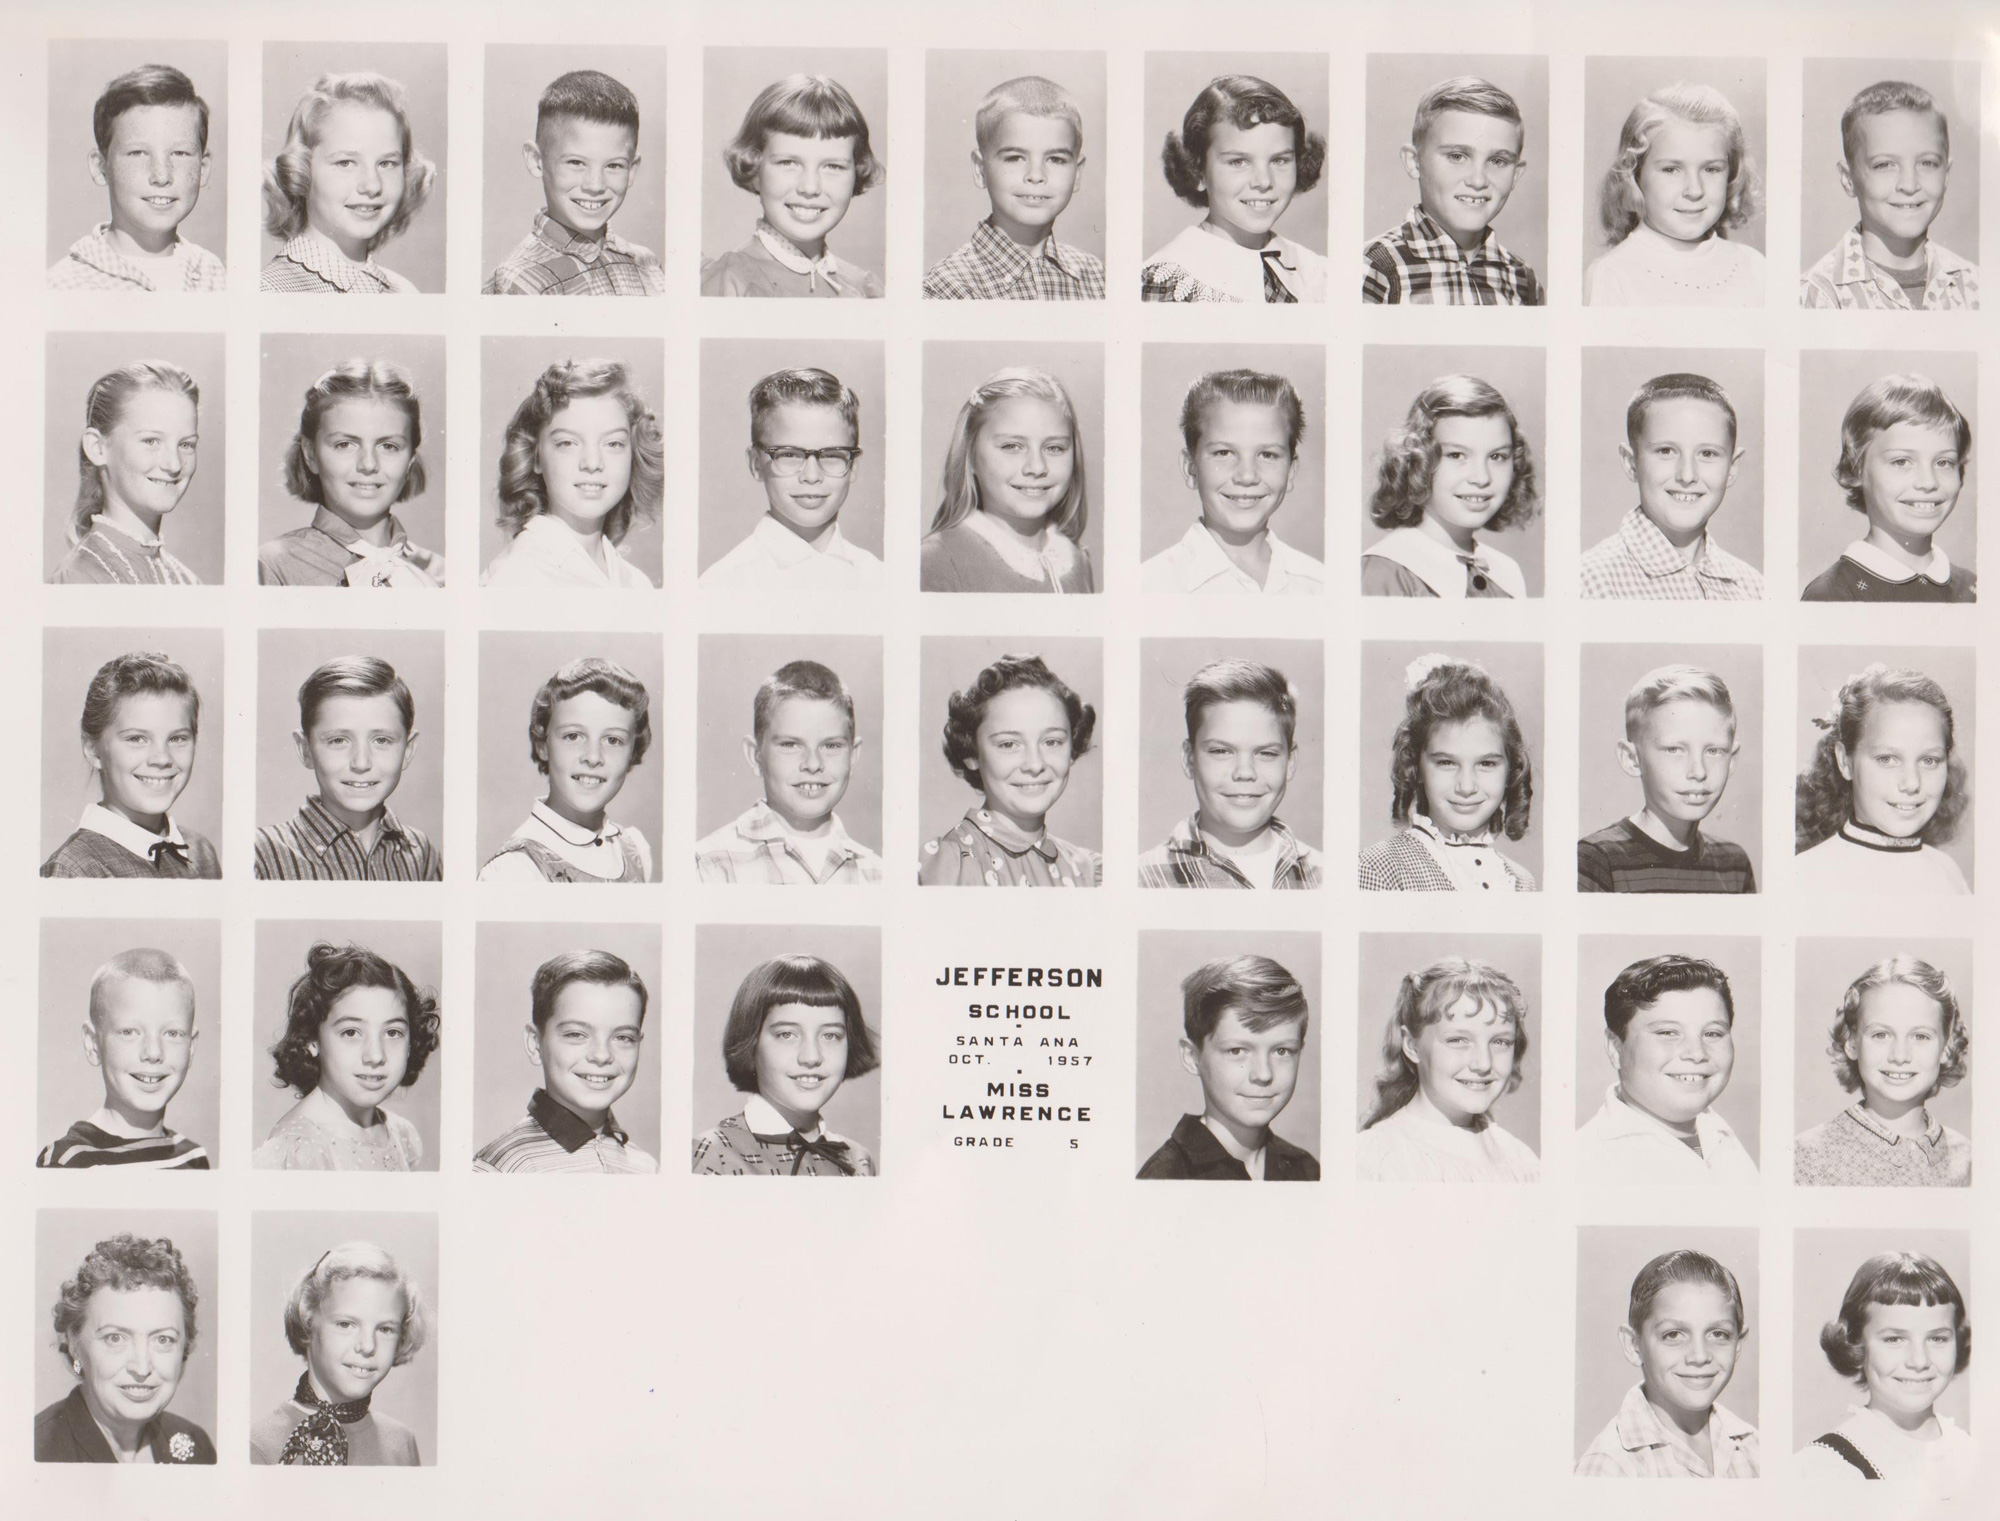 Jefferson 5th-grade Miss Lawrence (Thanks to Doug King!)